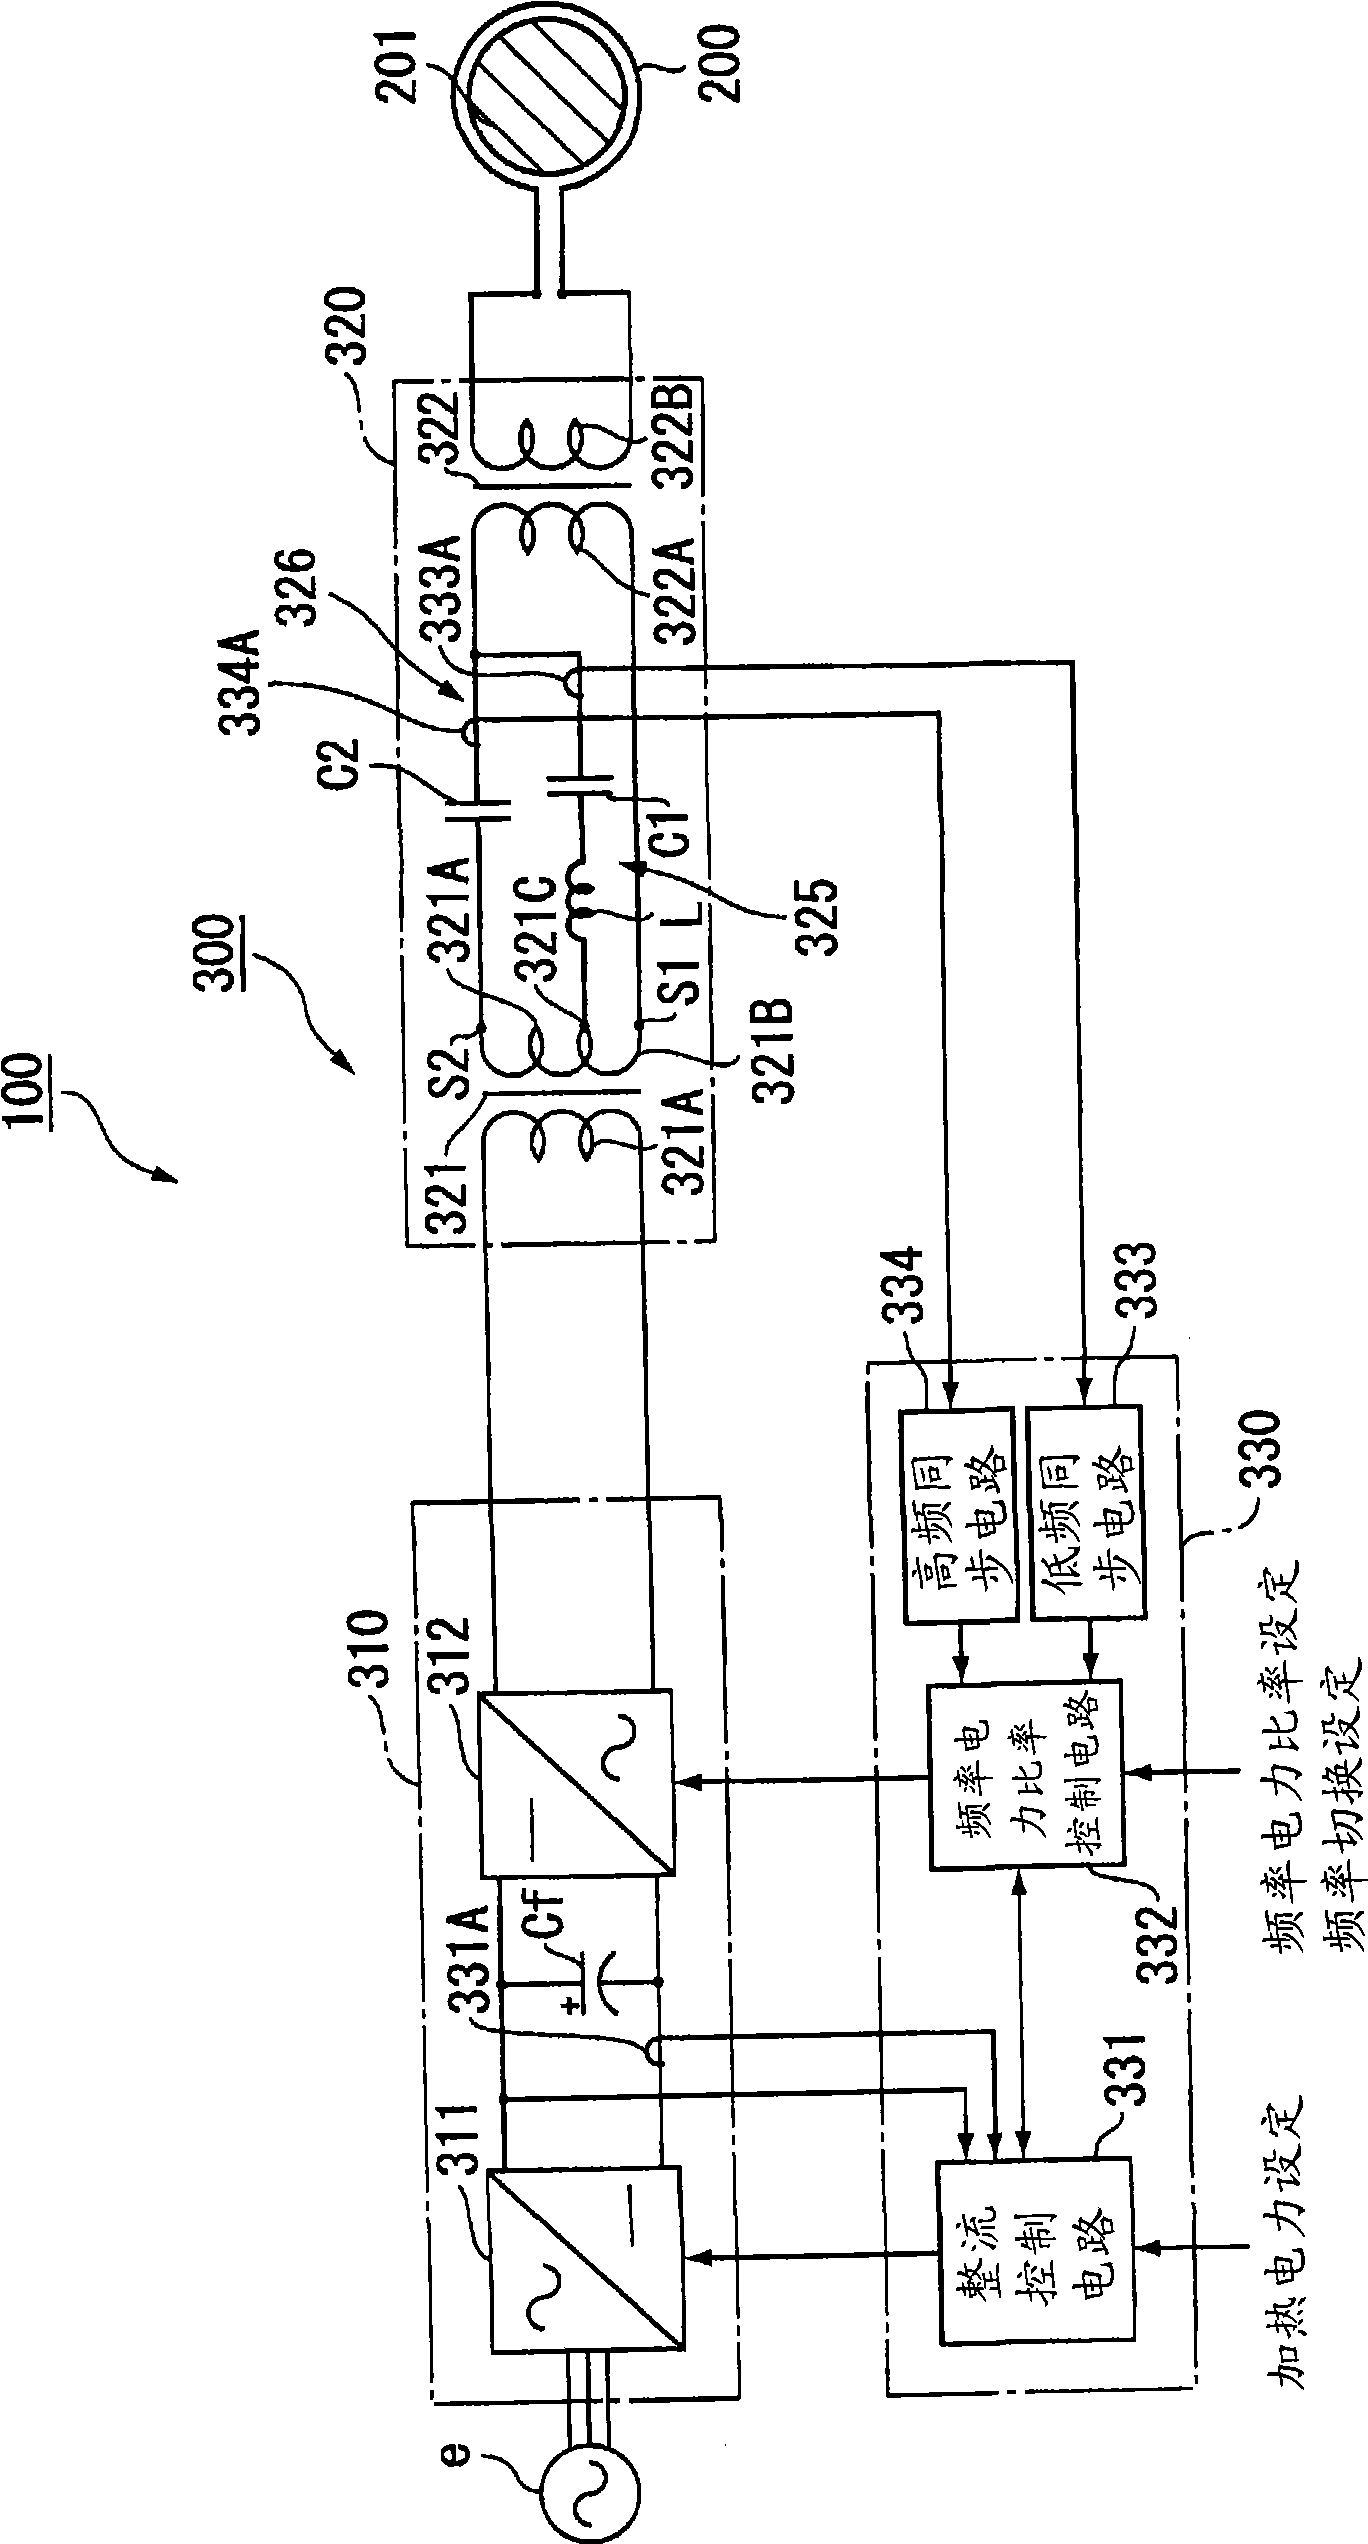 Power-feeding device and induction heating device